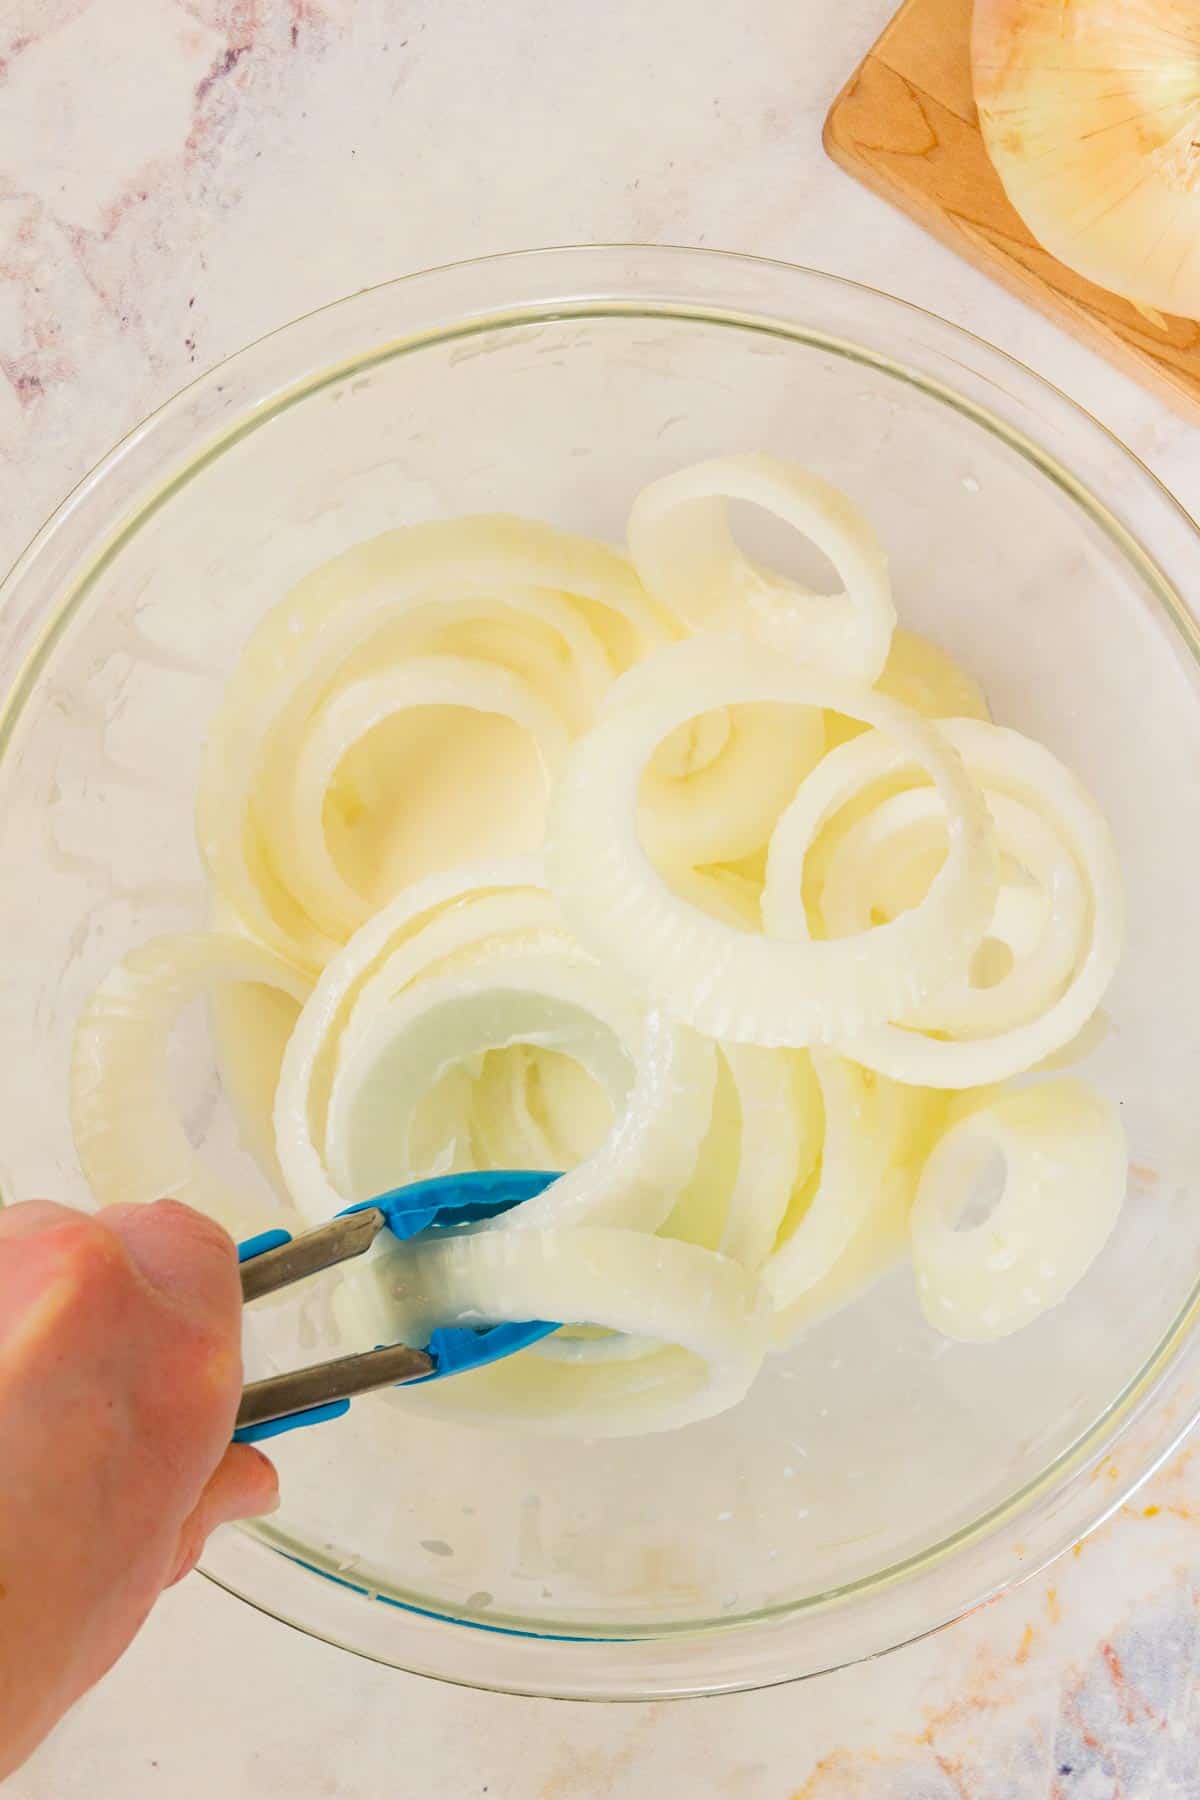 Onion slices are dipped into a bowl of milk coating.